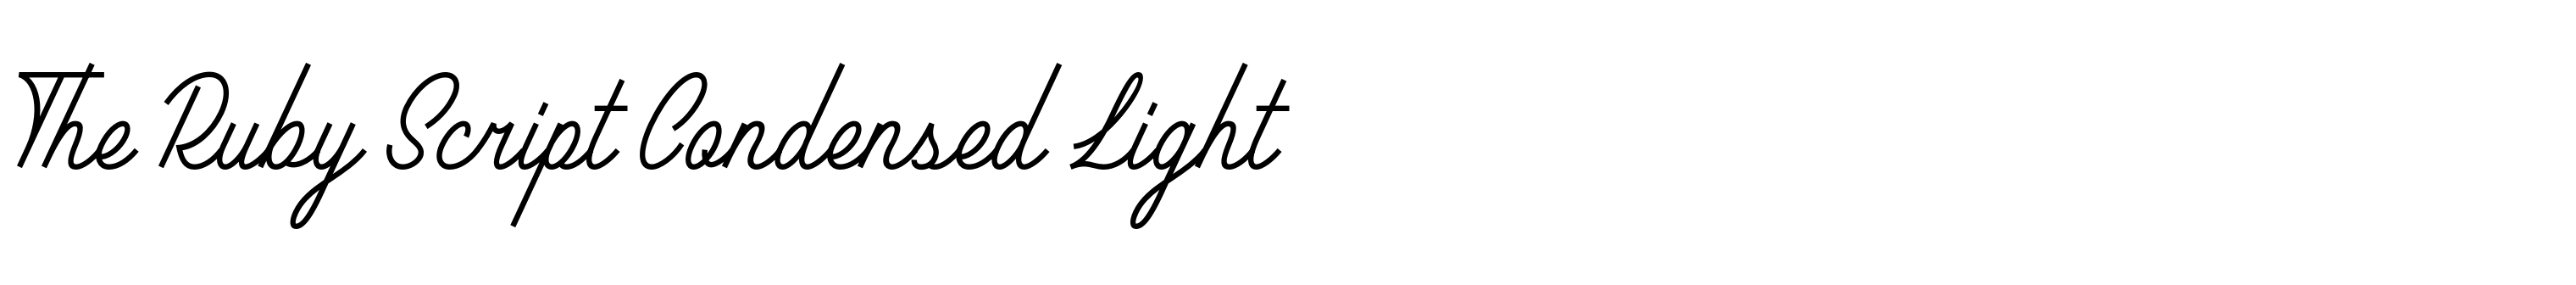 The Ruby Script Condensed Light